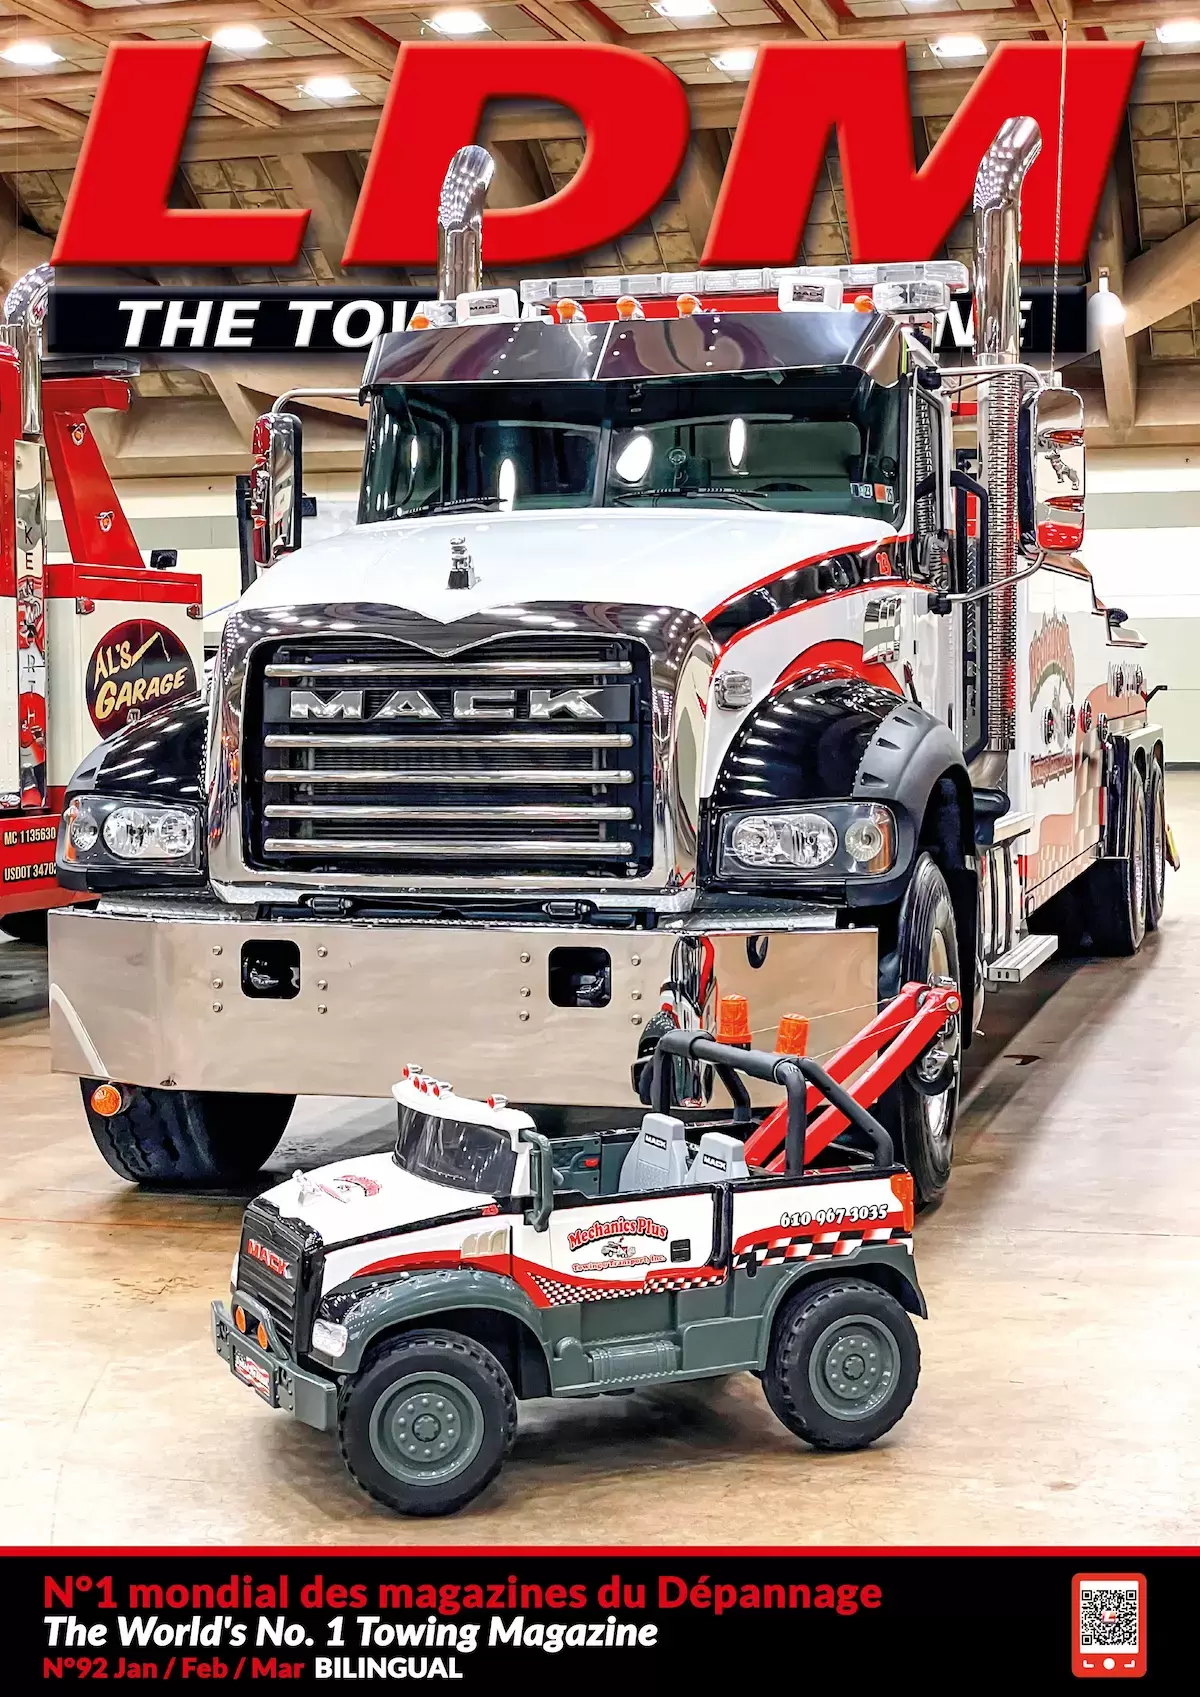 The Towing Magazine